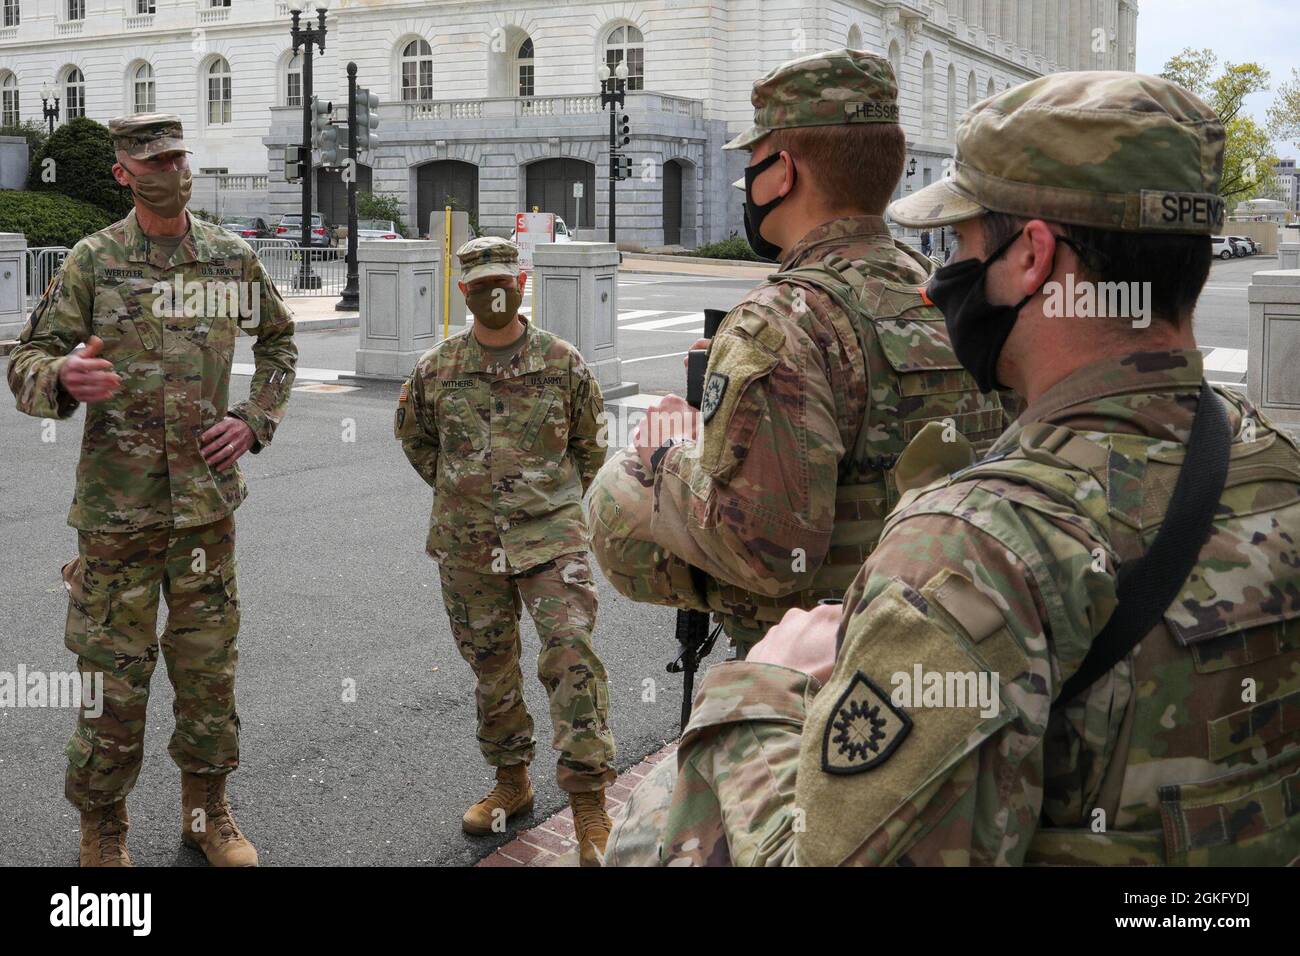 U.S. Army Col. Brian Wertzler, left, deputy adjutant general, Kentucky National Guard, and Command Sgt. Maj. Jesse Withers, center, state command sergeant major, Kentucky National Guard, addresses a group of Soldiers near the U.S. Capitol in Washington, D.C., April 12, 2021. The National Guard has been requested to continue supporting federal law enforcement agencies with security, communications, medical evacuation, logistics, and safety support to state, district and federal agencies through mid-May. Stock Photo